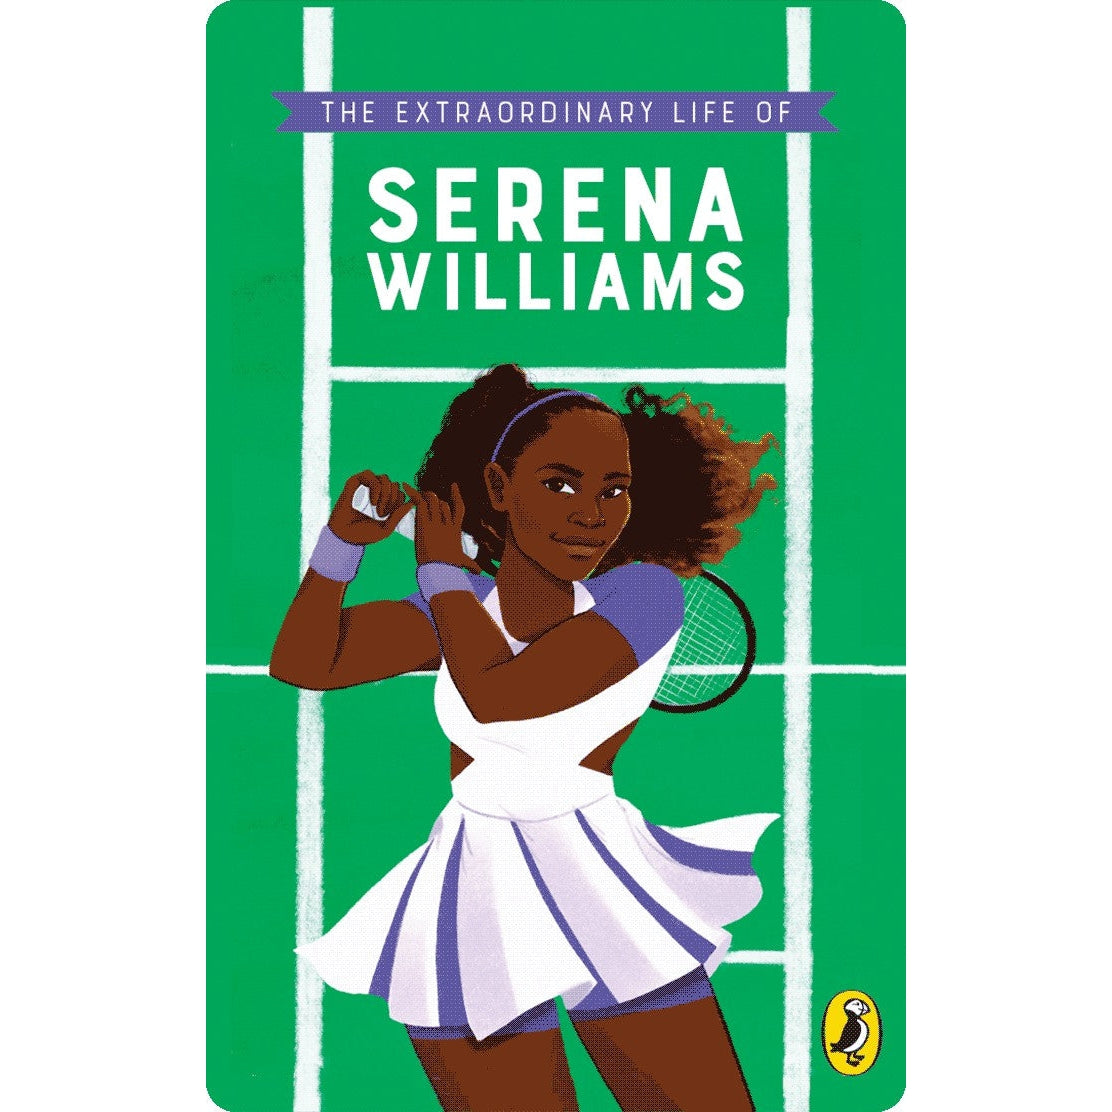 Yoto Card - The Extraordinary Life of Serena Williams - Child Friendly Audio Story Card for the Yoto Player